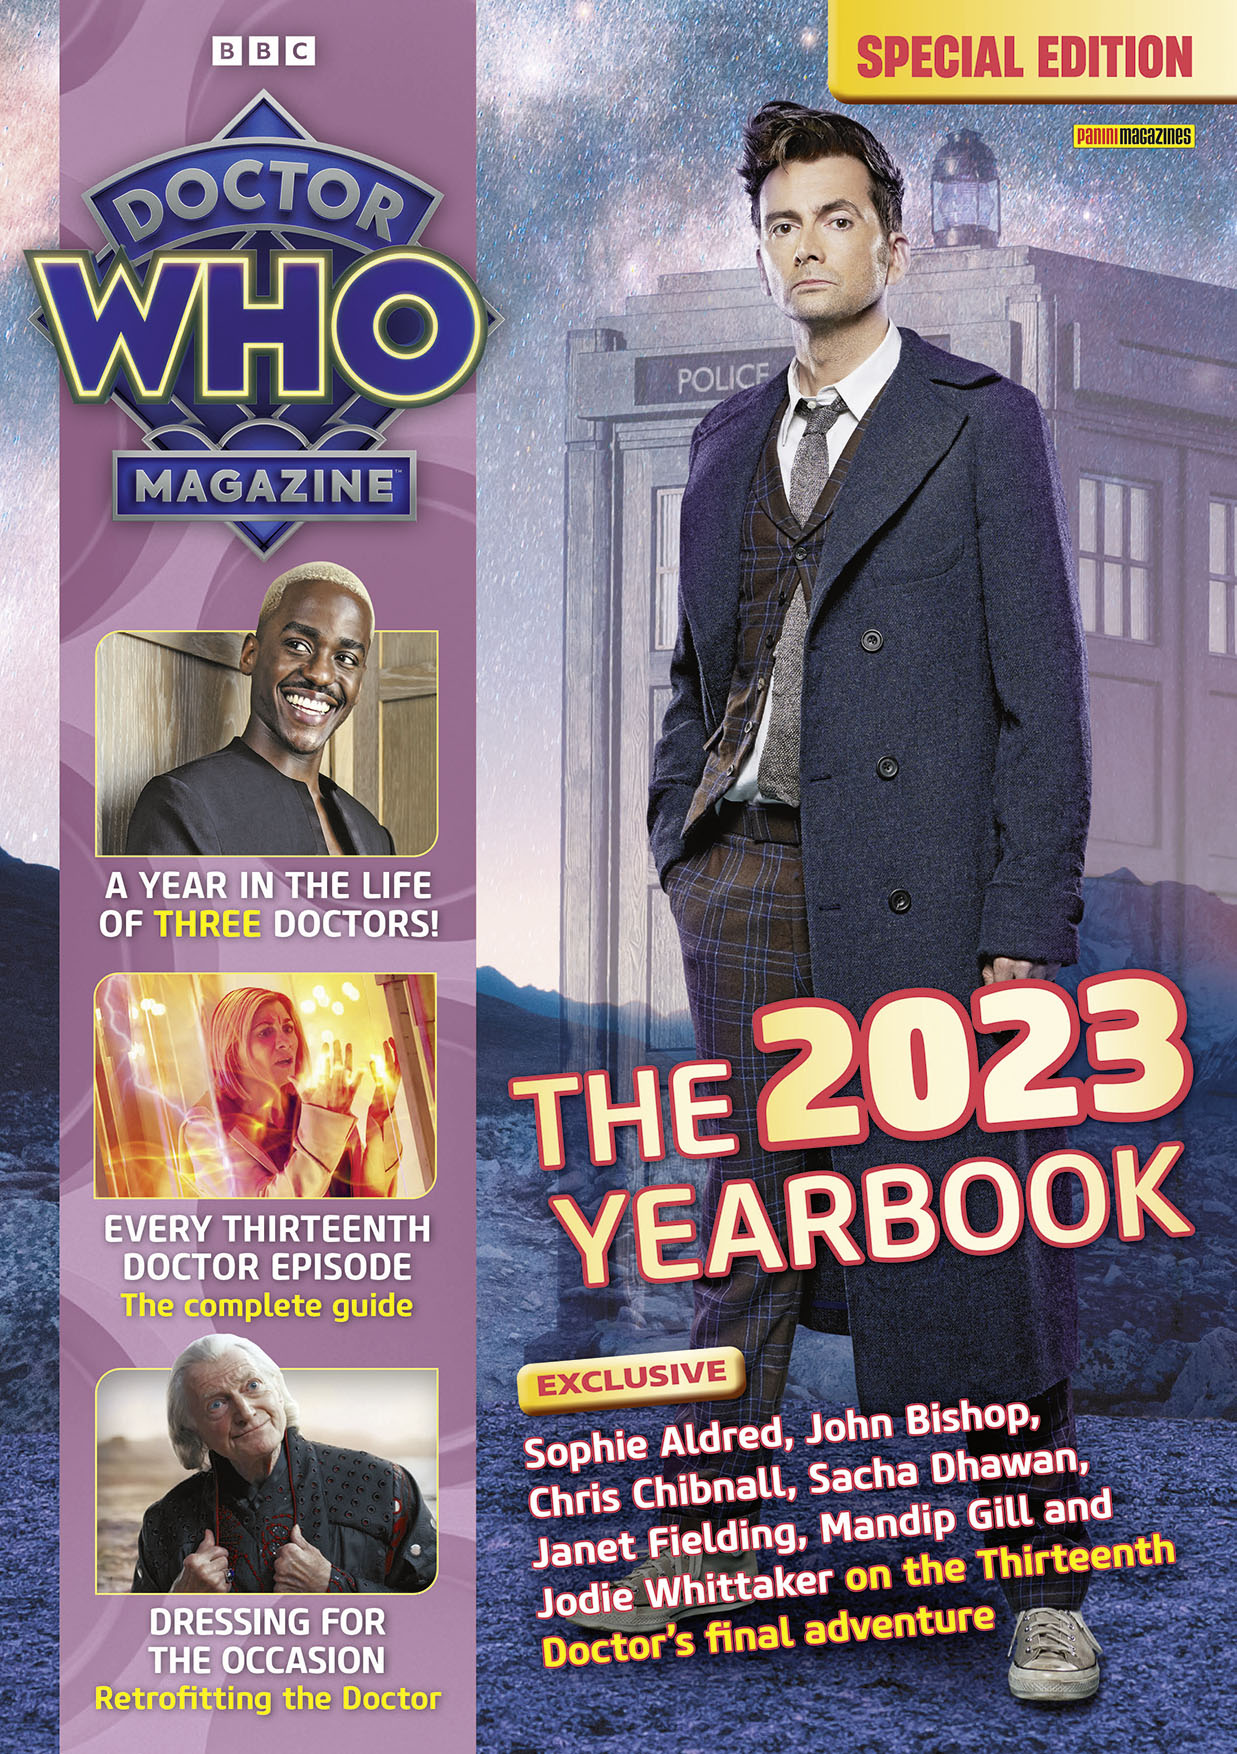 13021-doctor_who_magazine_special_editions-18921.jpg